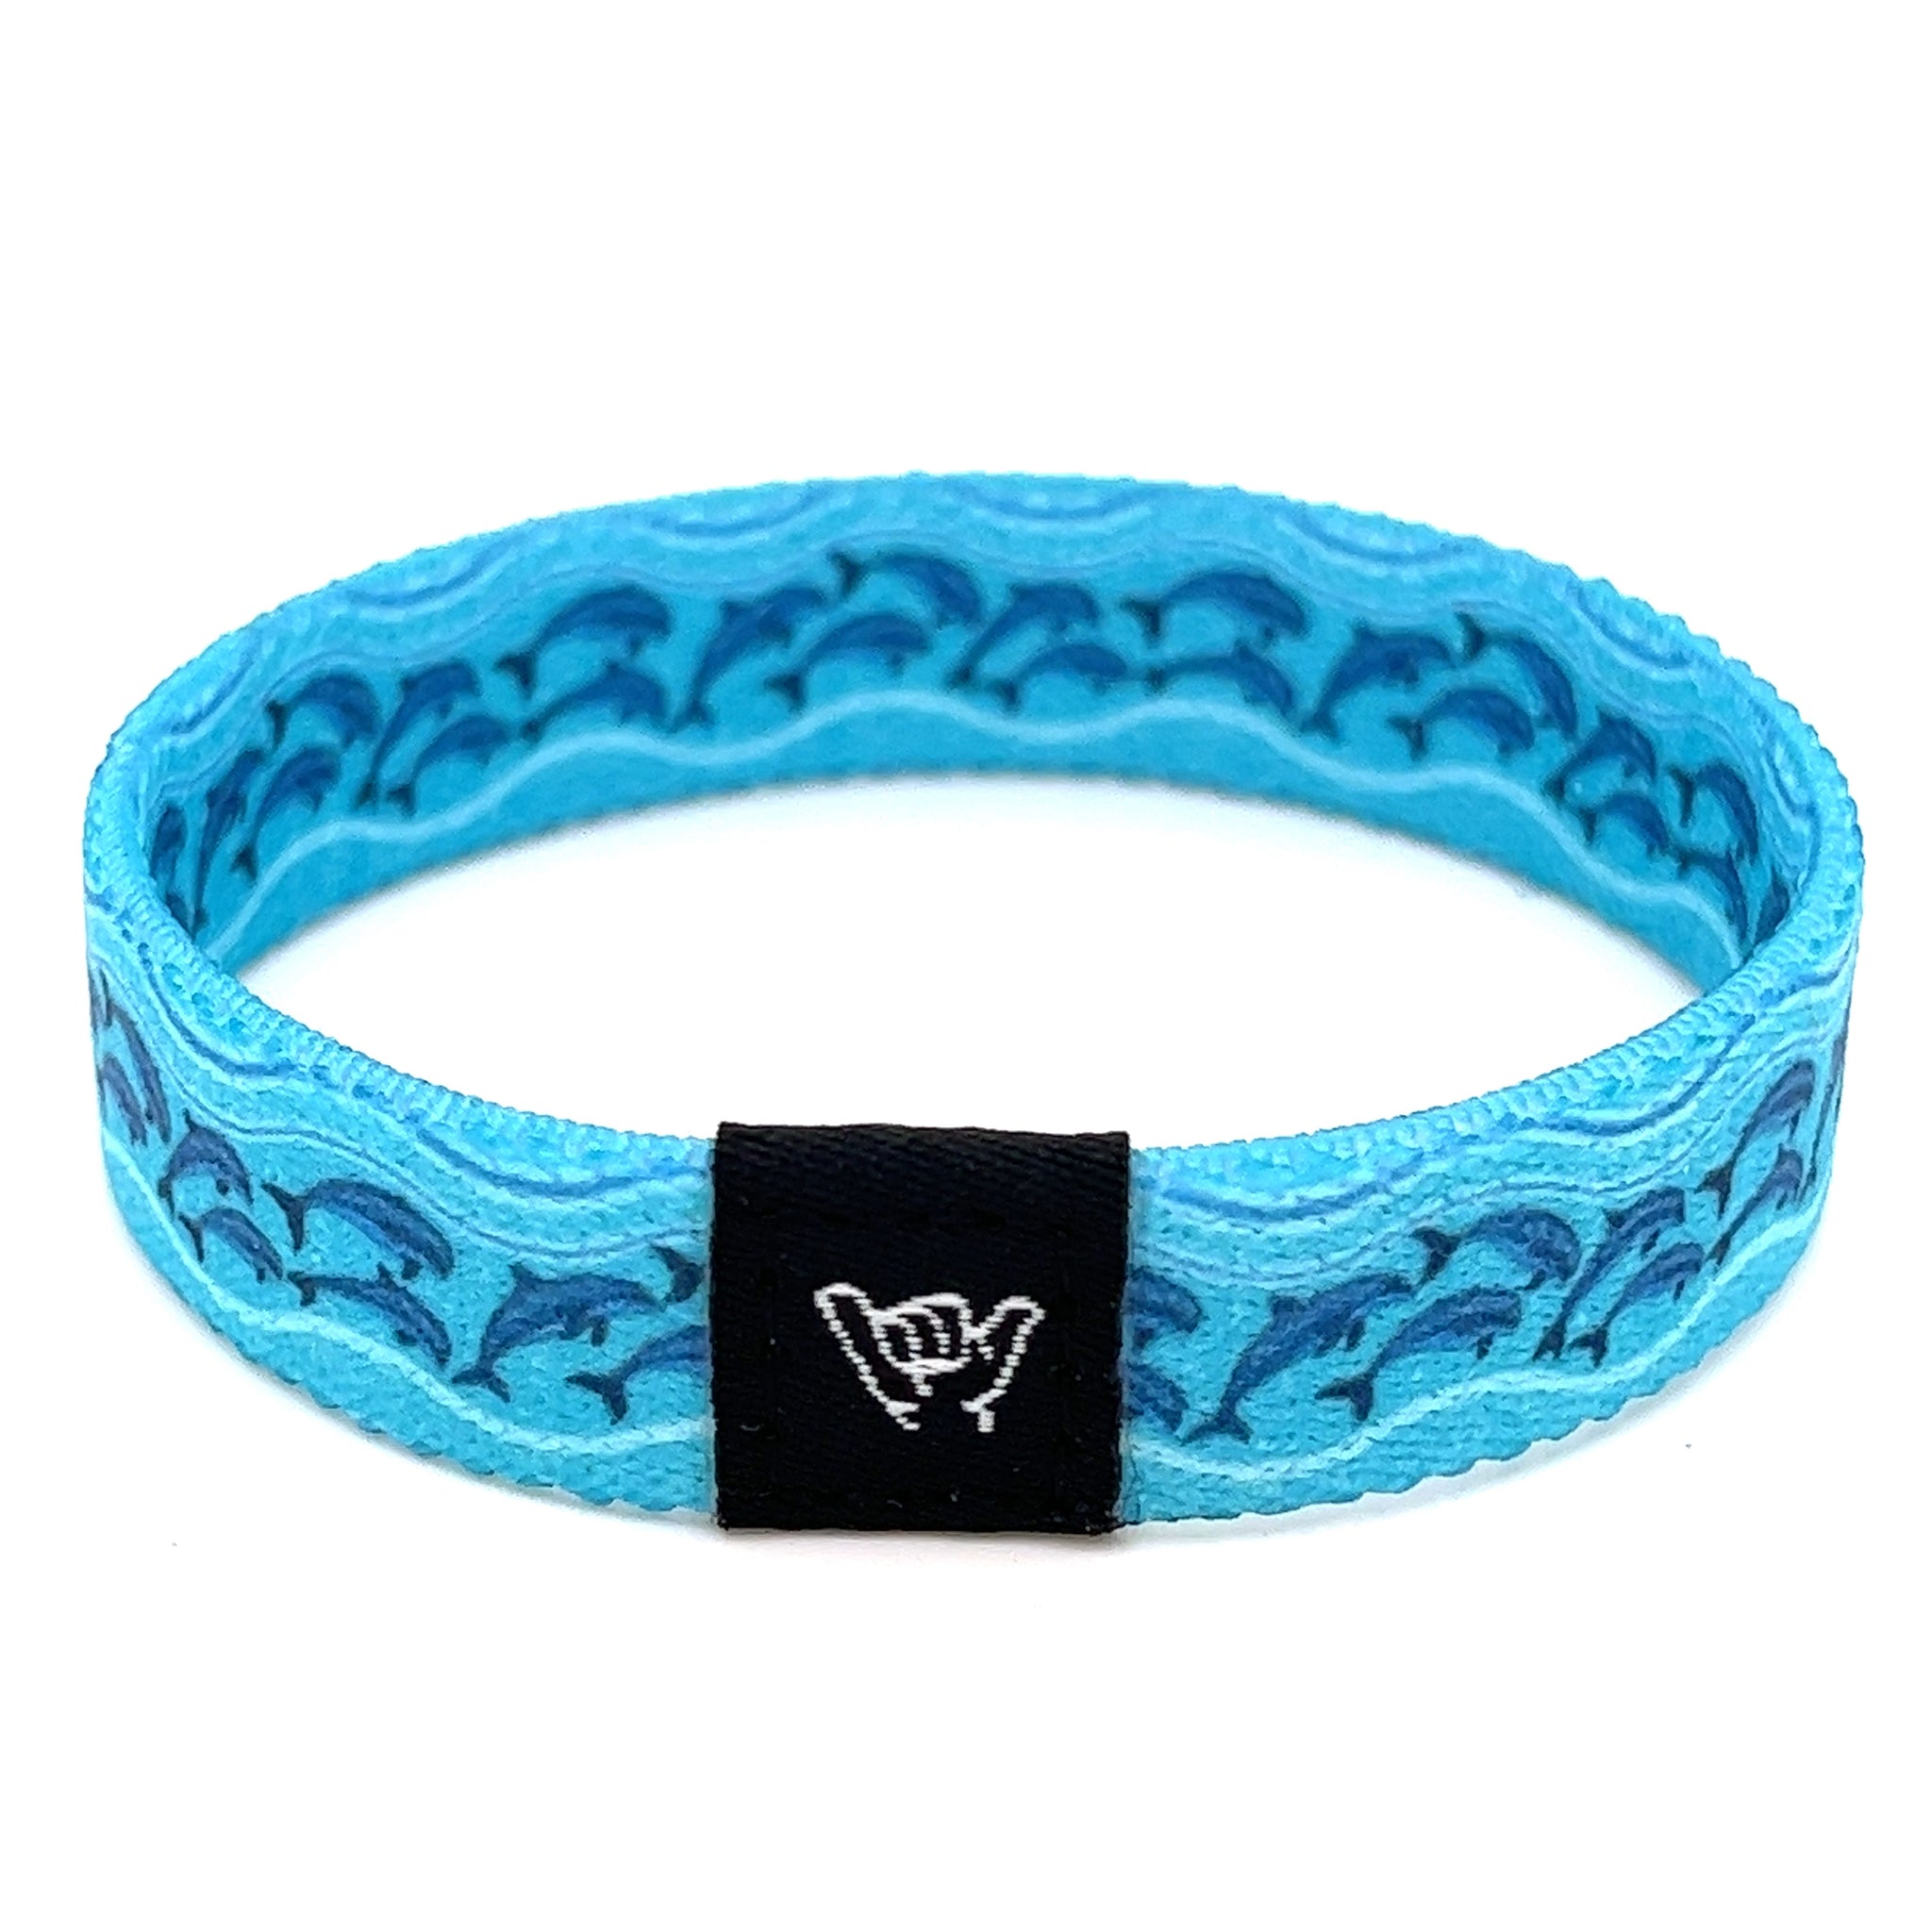 School of Dolphins Wristband Bracelet Hang – Bands Loose